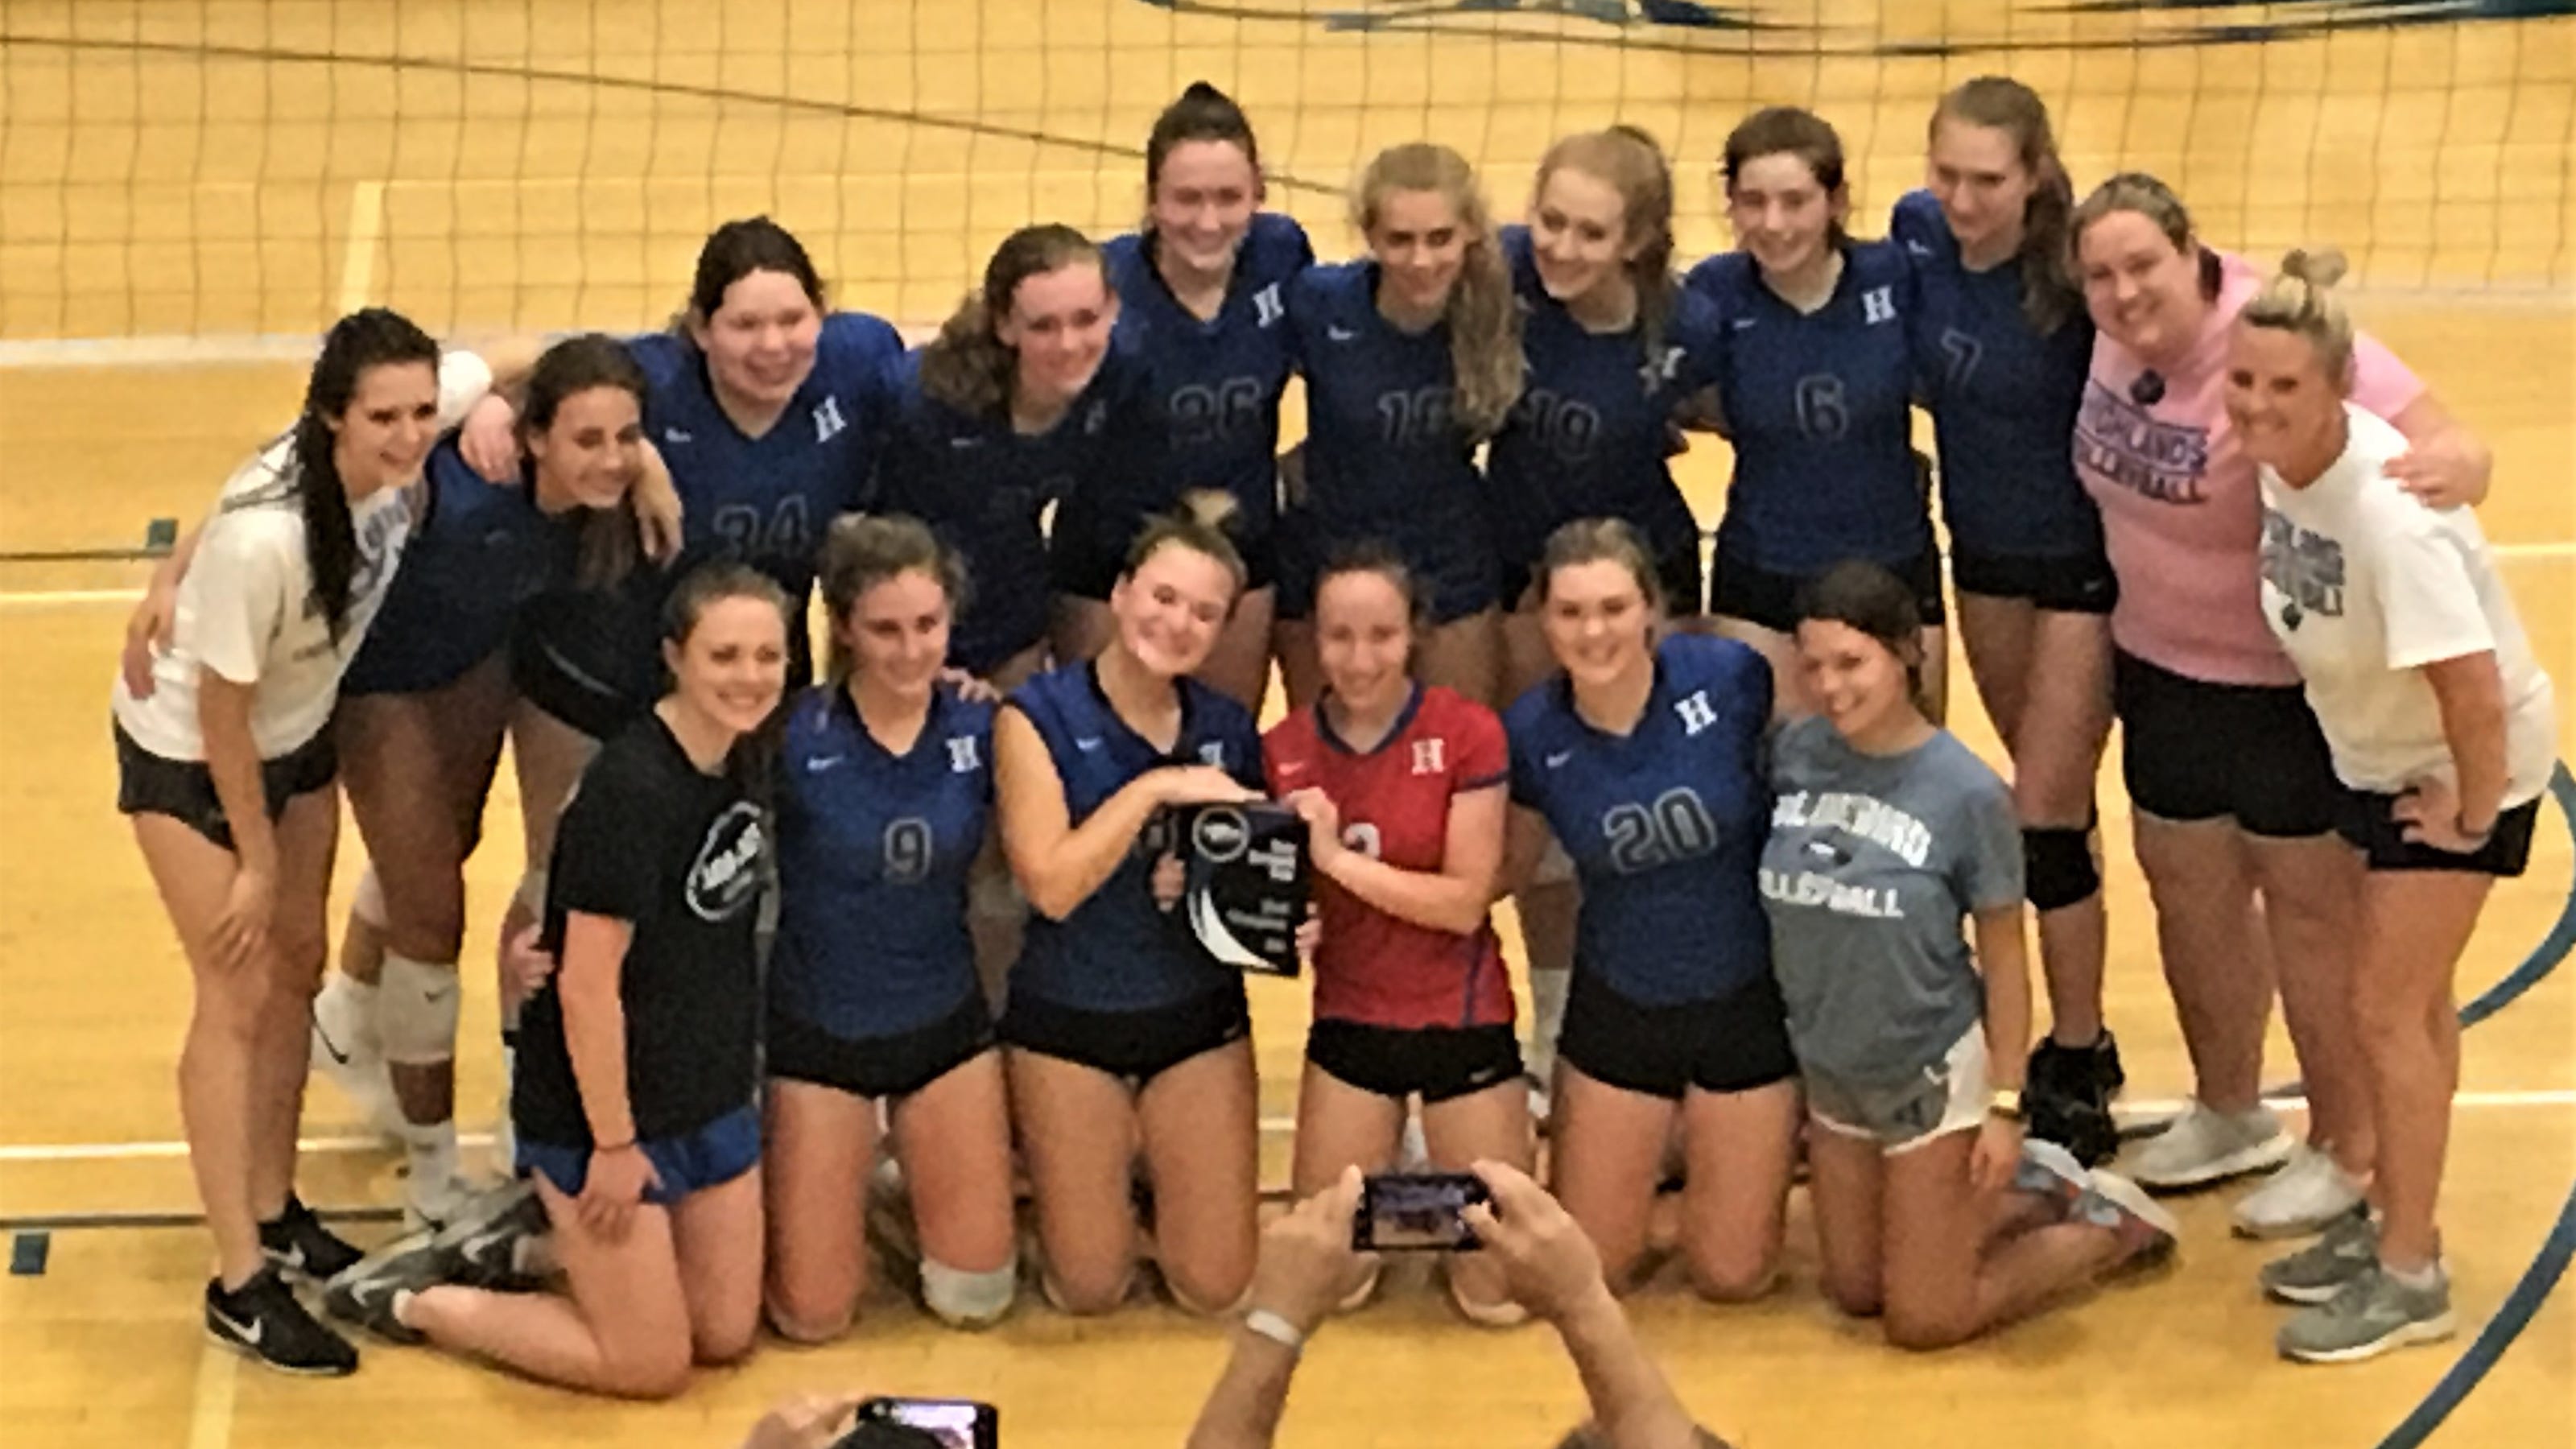 Year Round Volleyball League For Louisville Ky Kentucky Makes History With Its First Ever Di Women S Volleyball National Title Ncaa Com Welcome To Legacy Volleyball Club Normalacaryaas